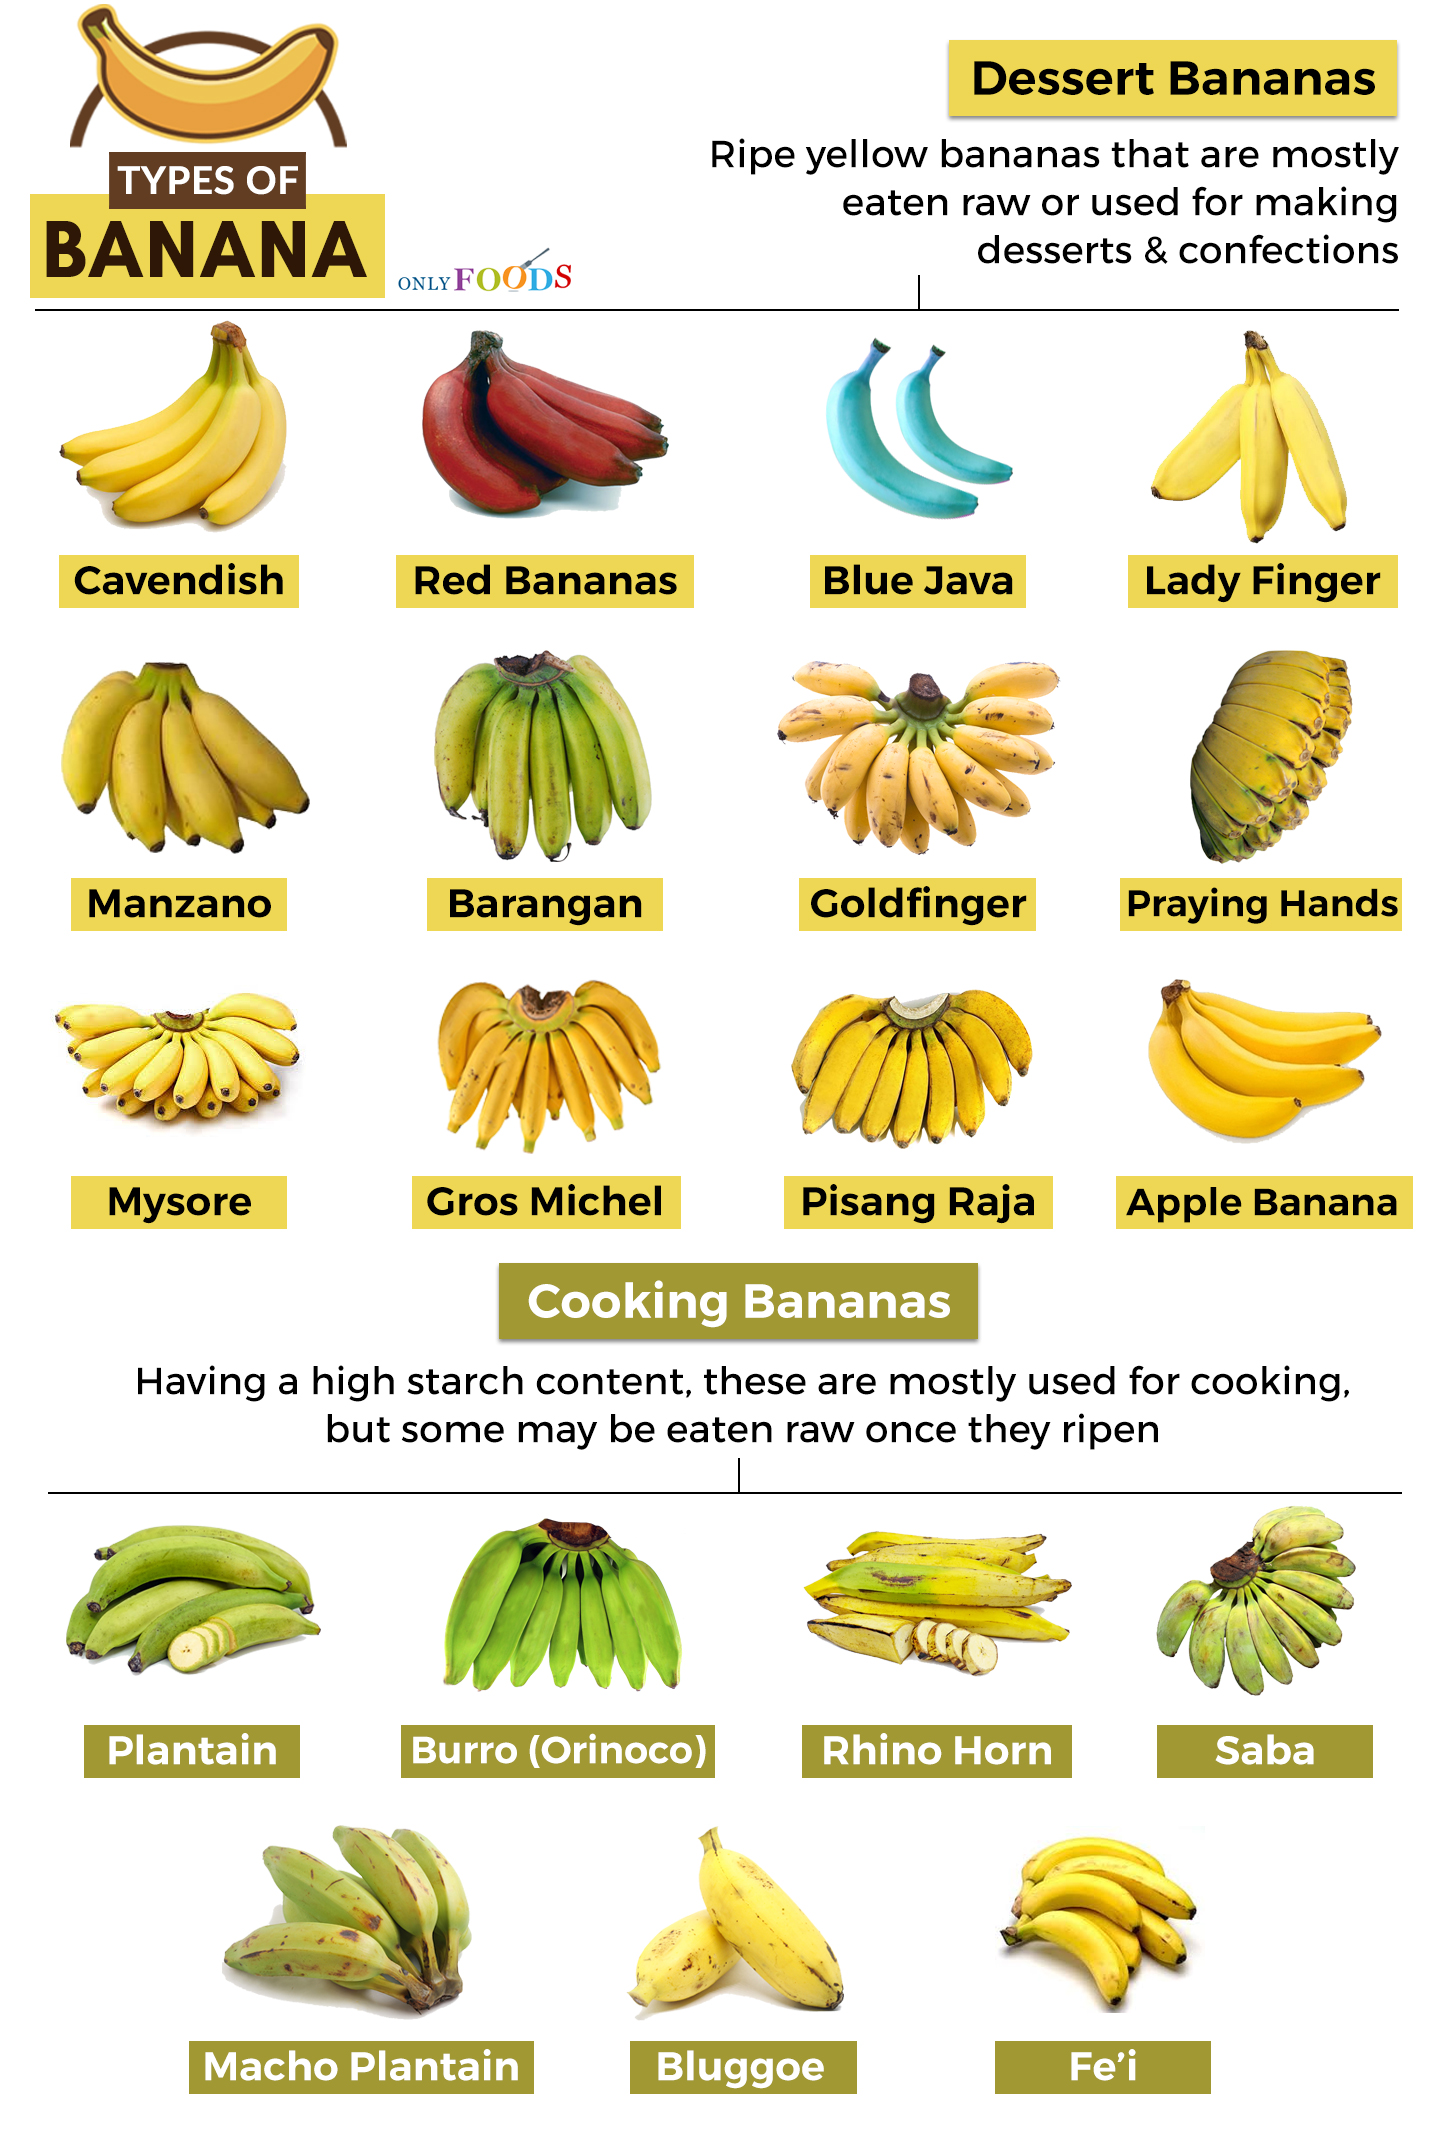 19 Types of Bananas and What to Do With Them - Only Foods